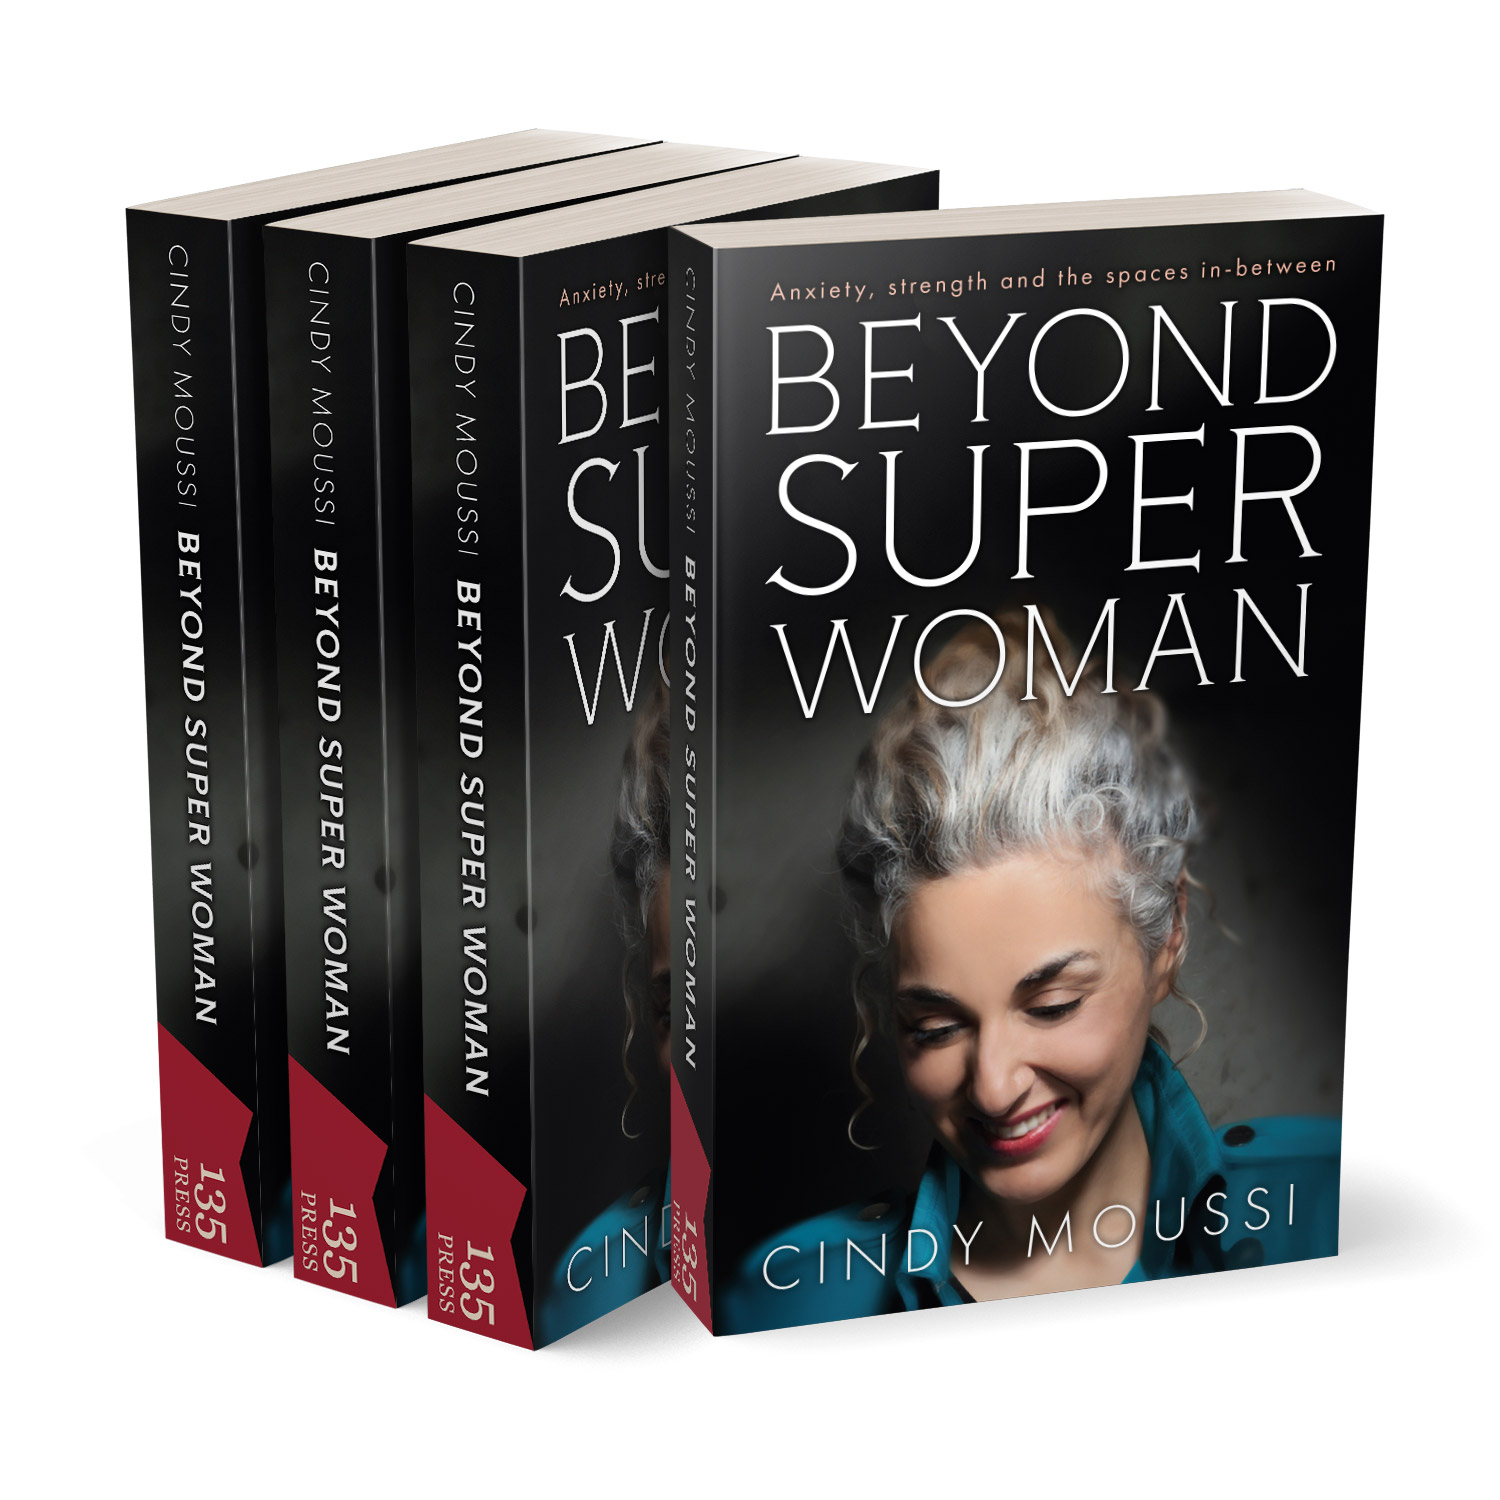 'Beyond Super Woman' is a deeply personal autobiography. The book cover was designed by Mark Thomas, of coverness.com. To find out more about my book design services, please visit www.coverness.com.